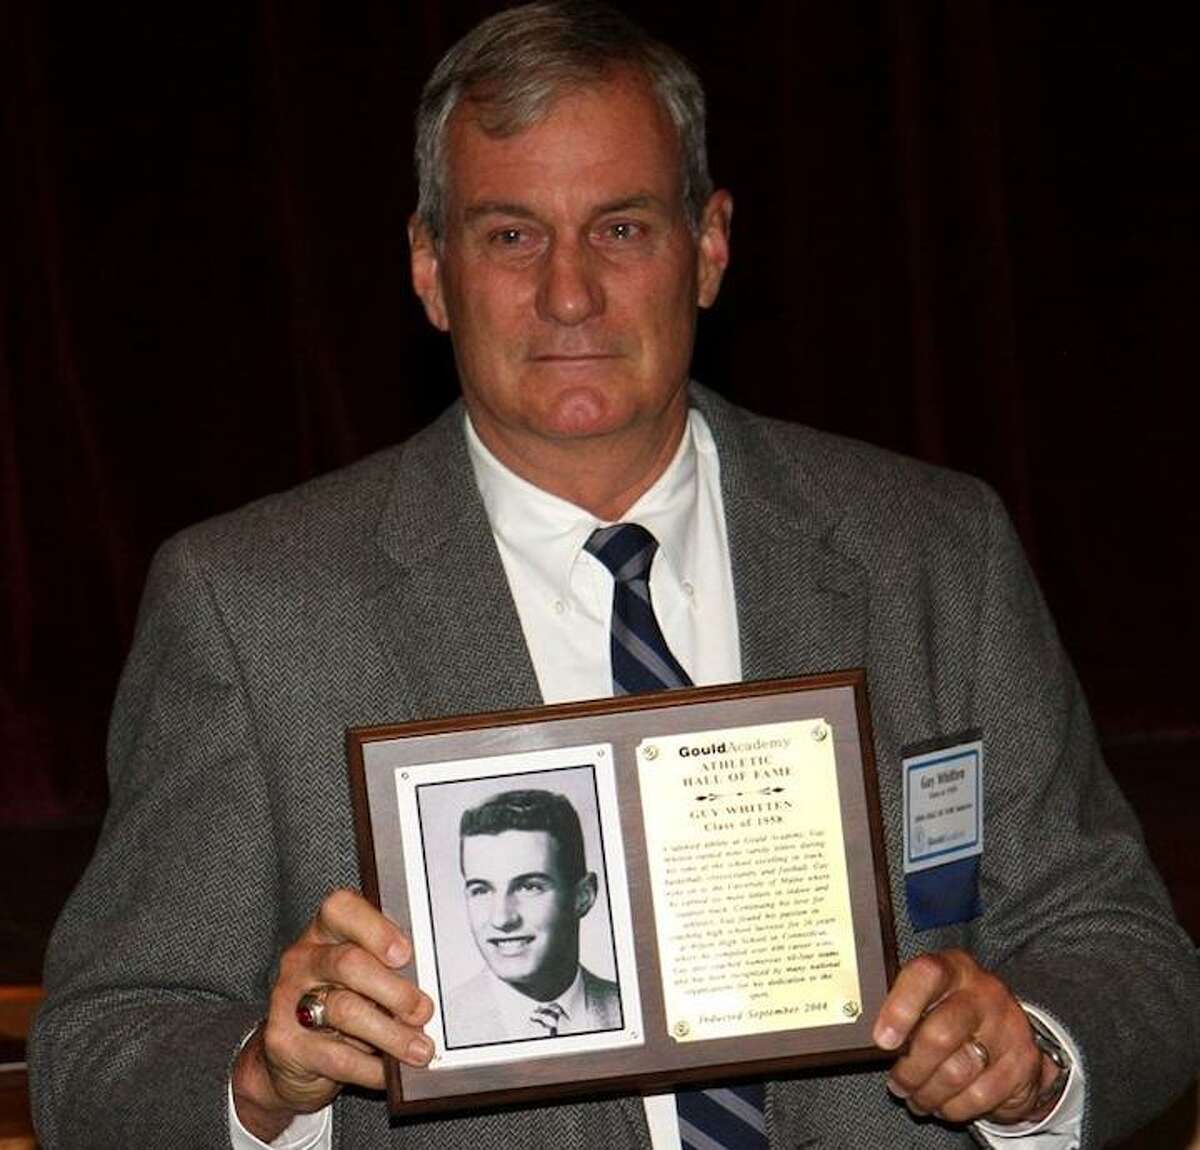 Former Wilton High boys lacrosse coach Guy Whitten is among seven inductees in the Fairfield County Sports Hall of Fame's 2019 class. Whitten is shown with a plaque he received after being enshrined in the University of Maine's Gould Academy Athletic Hall of Fame.